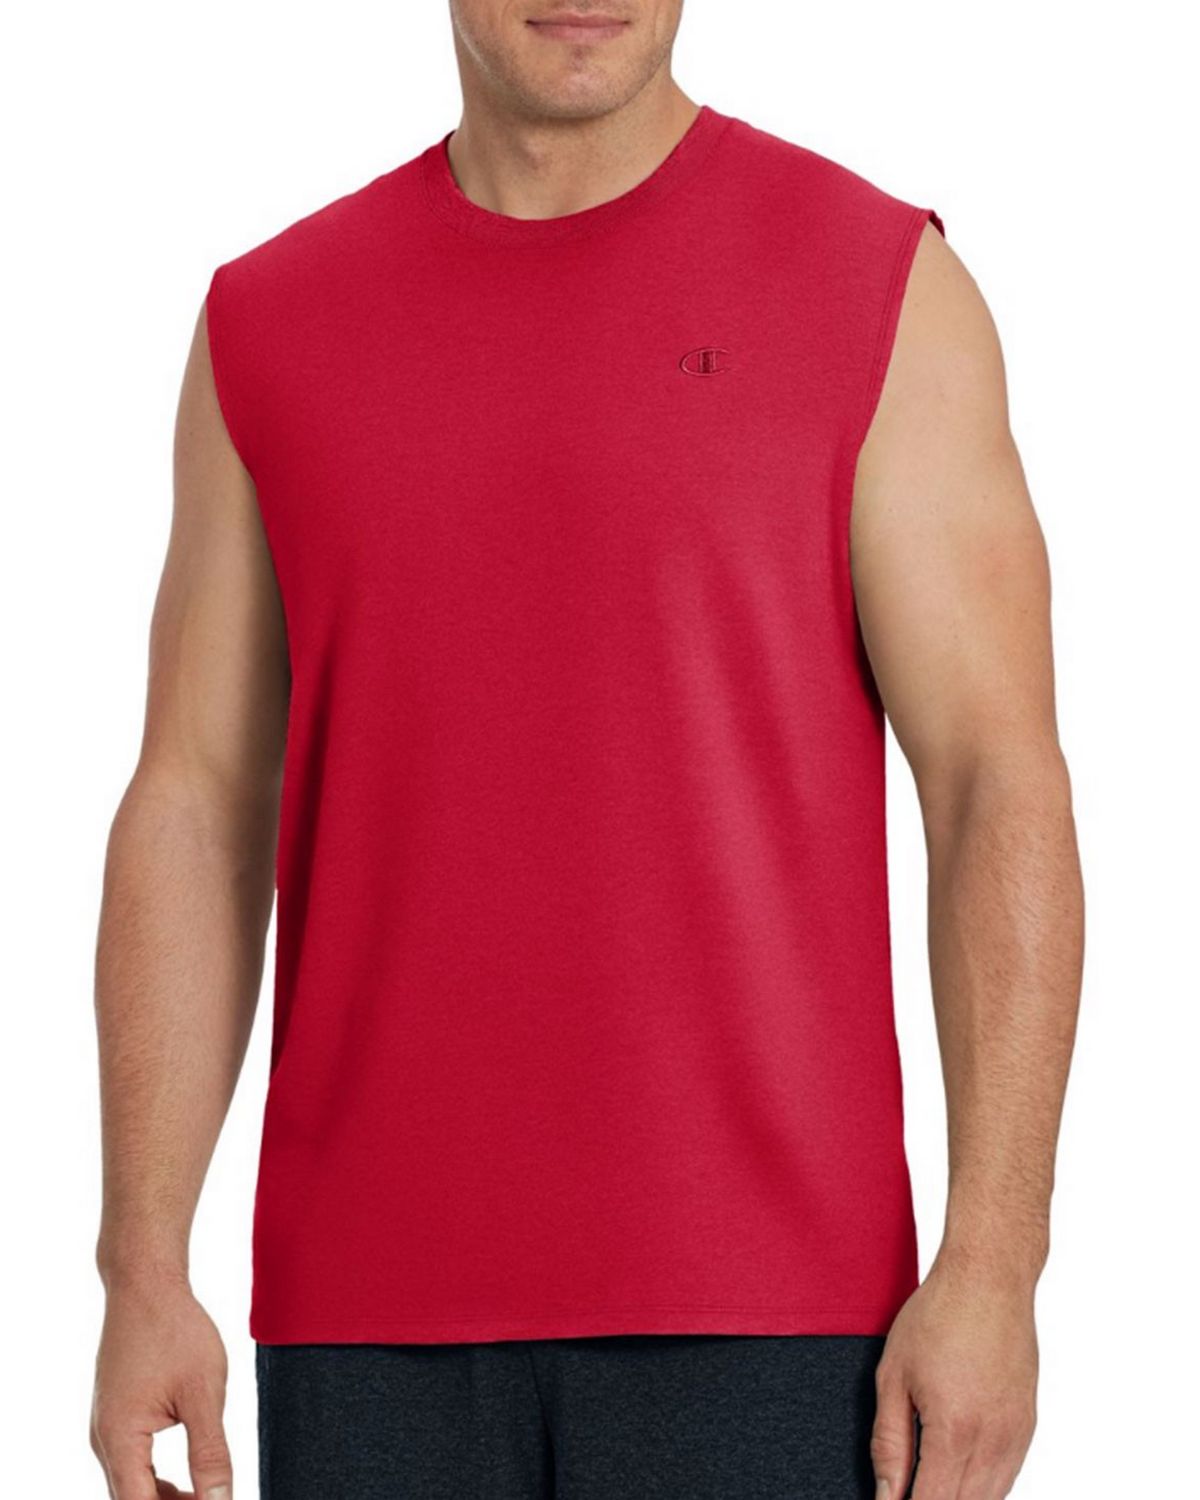 Champion Mens Jersey Atheltic Fit Muscle Tee Classic Cotton T-Shirt Sleeveless